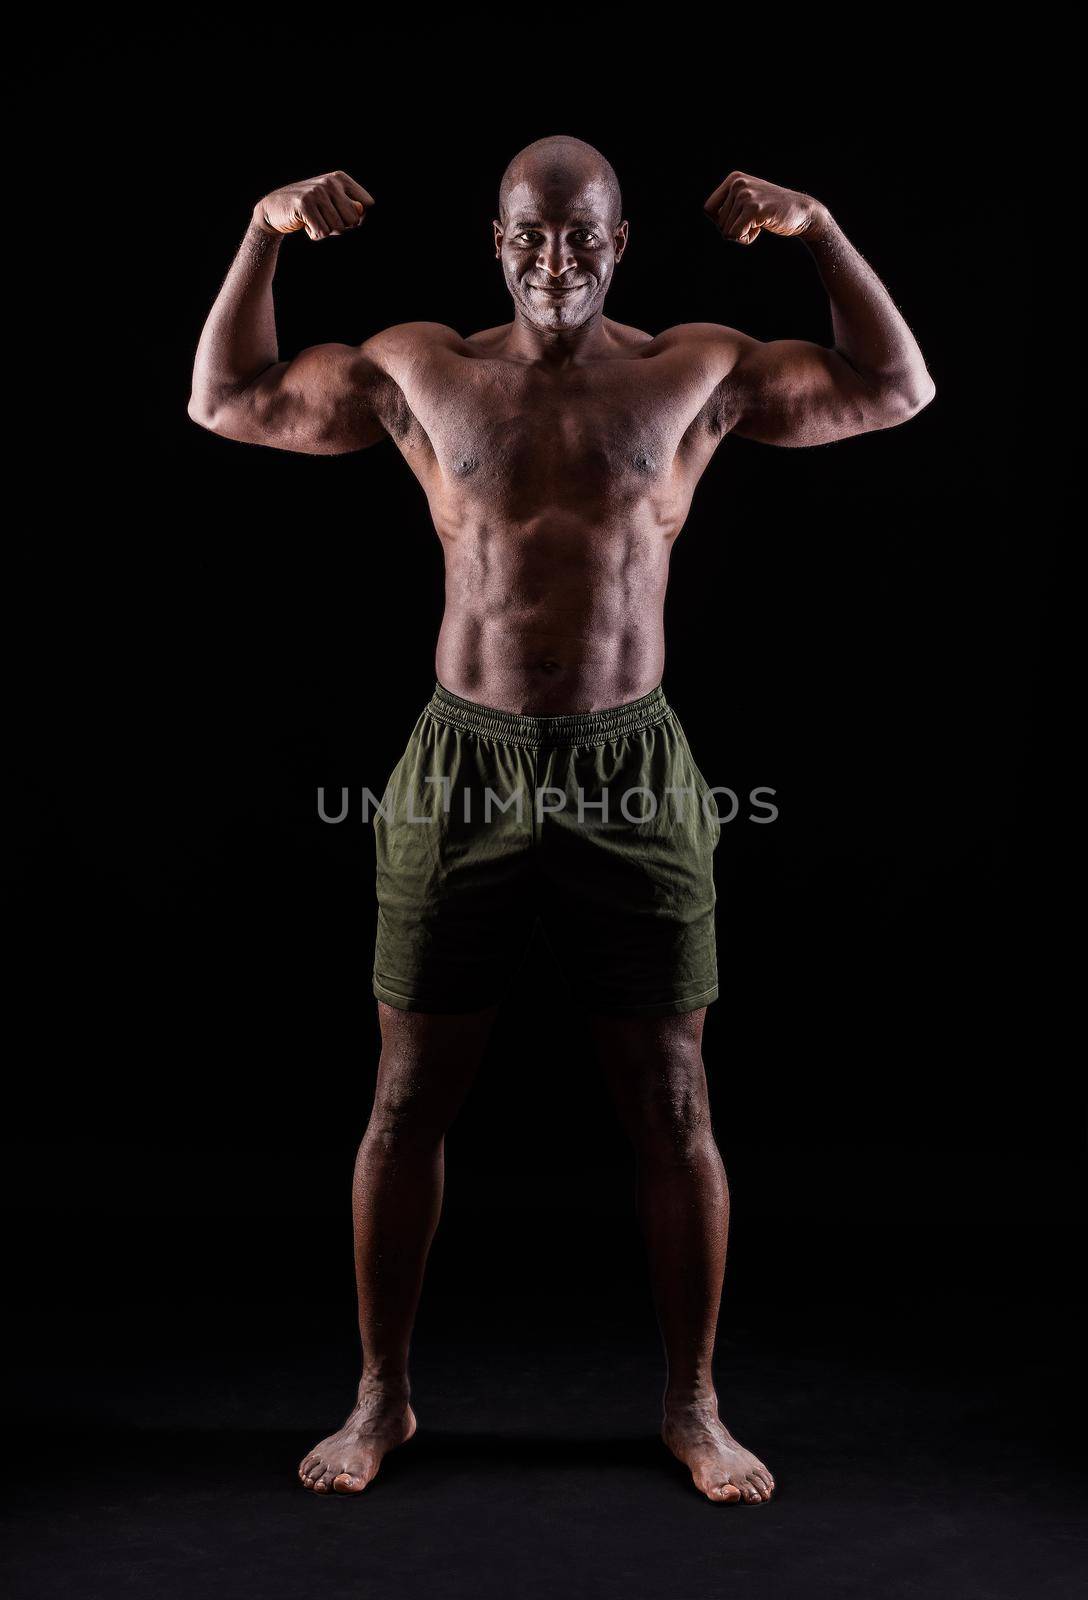 African American muscular man smiling flexing arm muscles on a black background by ivanmoreno